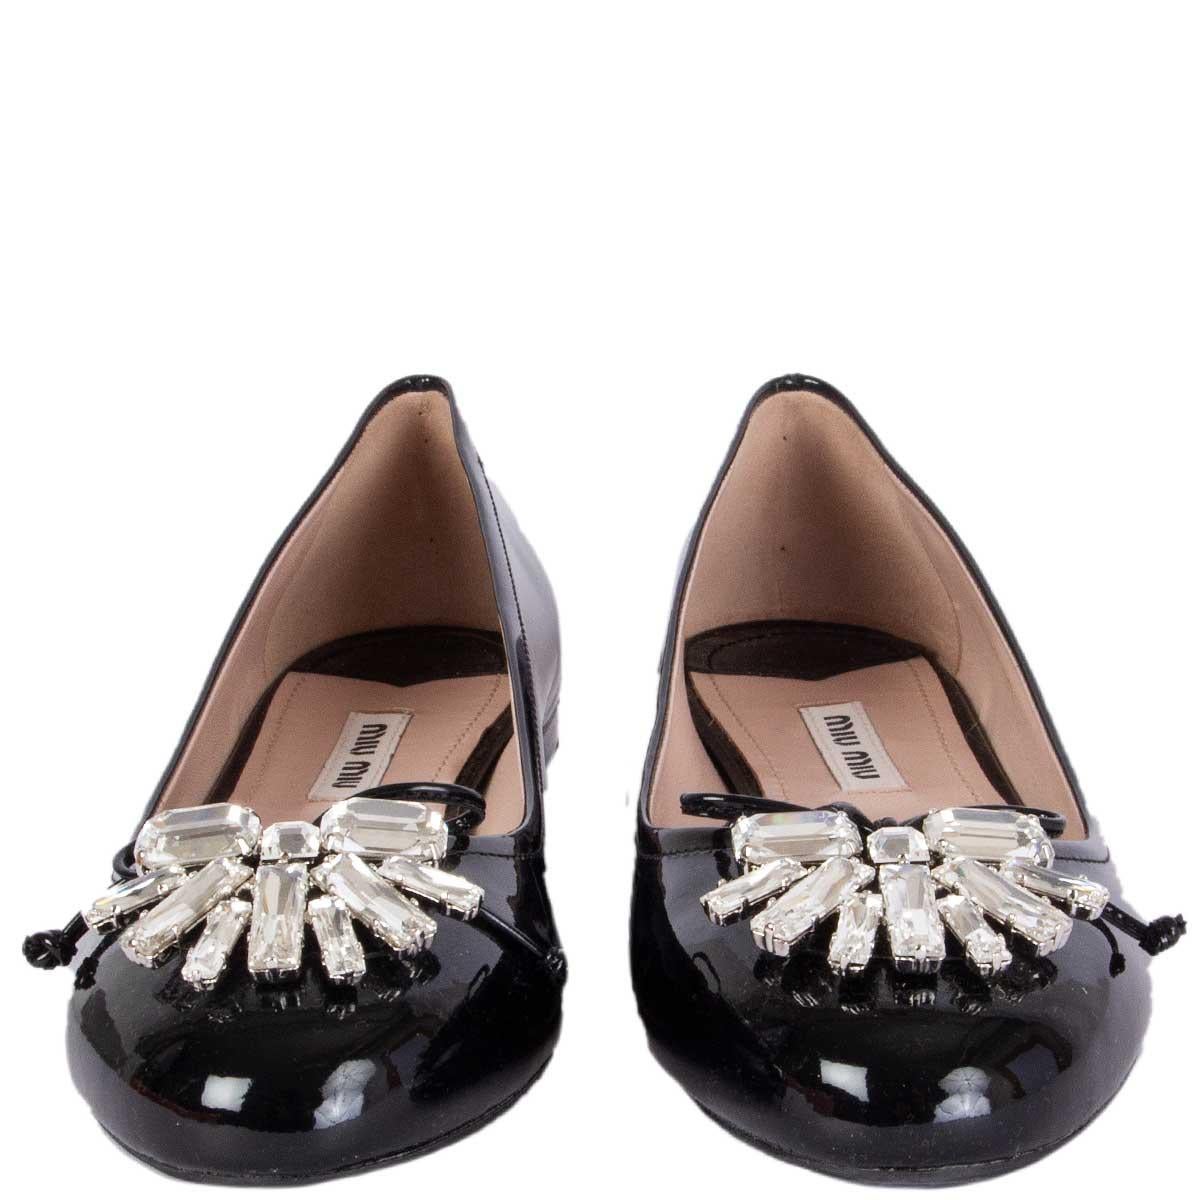 100% authentic Miu Miu ballet flats in black patent leather embellished with Swarovski crystals at tip. Brand new. Come with dust bag. 

Imprinted Size	37
Shoe Size	37
Inside Sole	24cm (9.4in)
Width	7.5cm (2.9in)
Heel	1.5cm